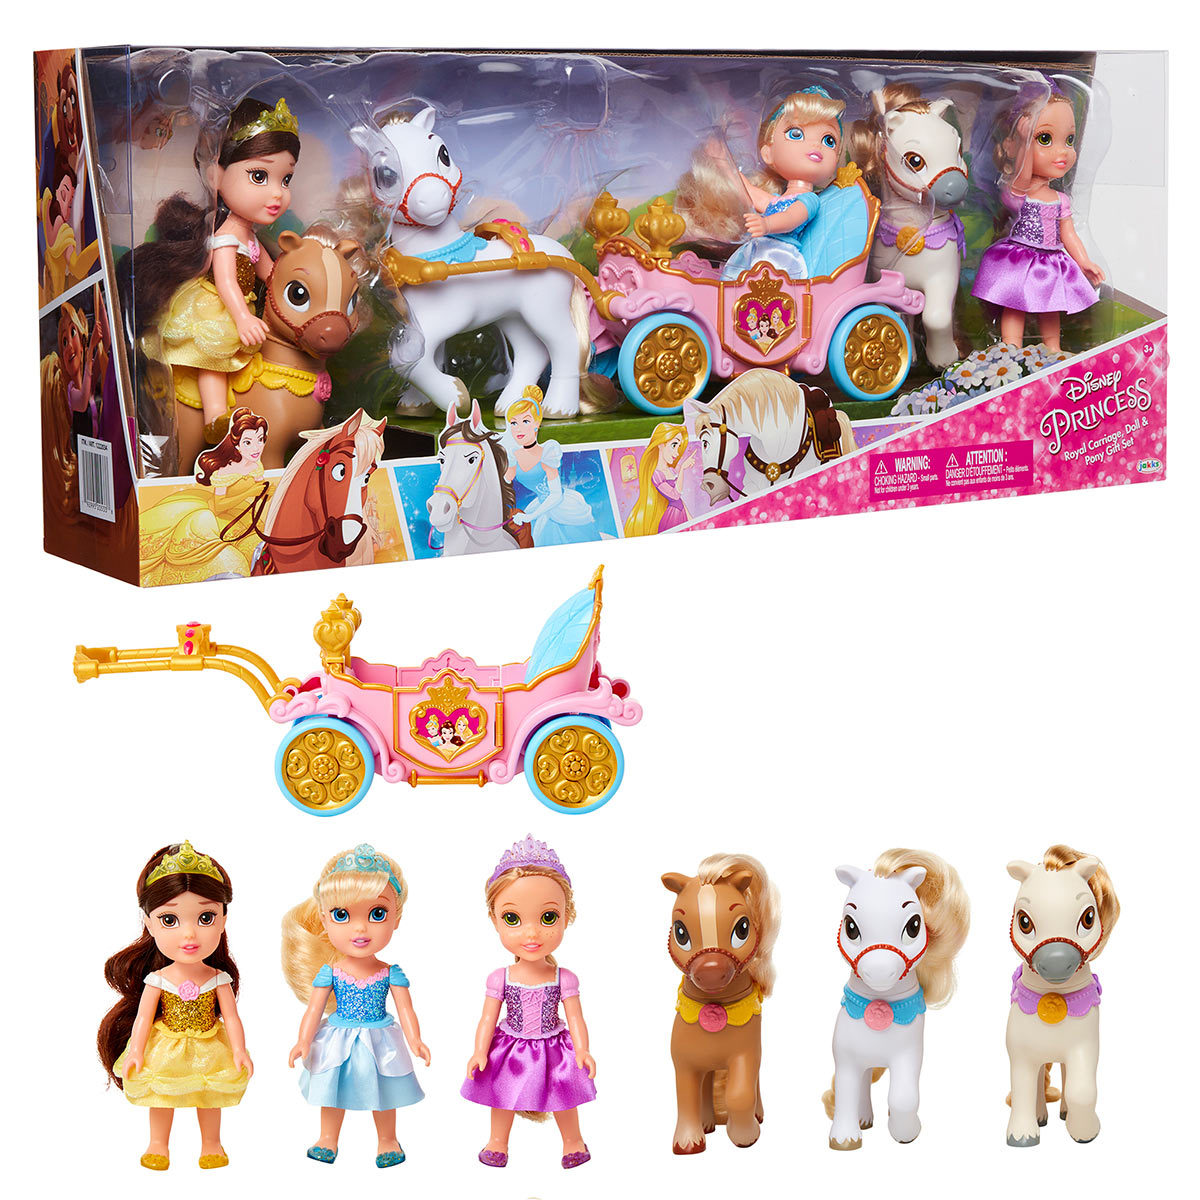 6 Inch (15cm) Disney Petite Princess Dolls And Carriage Gift Set (3+ Years)